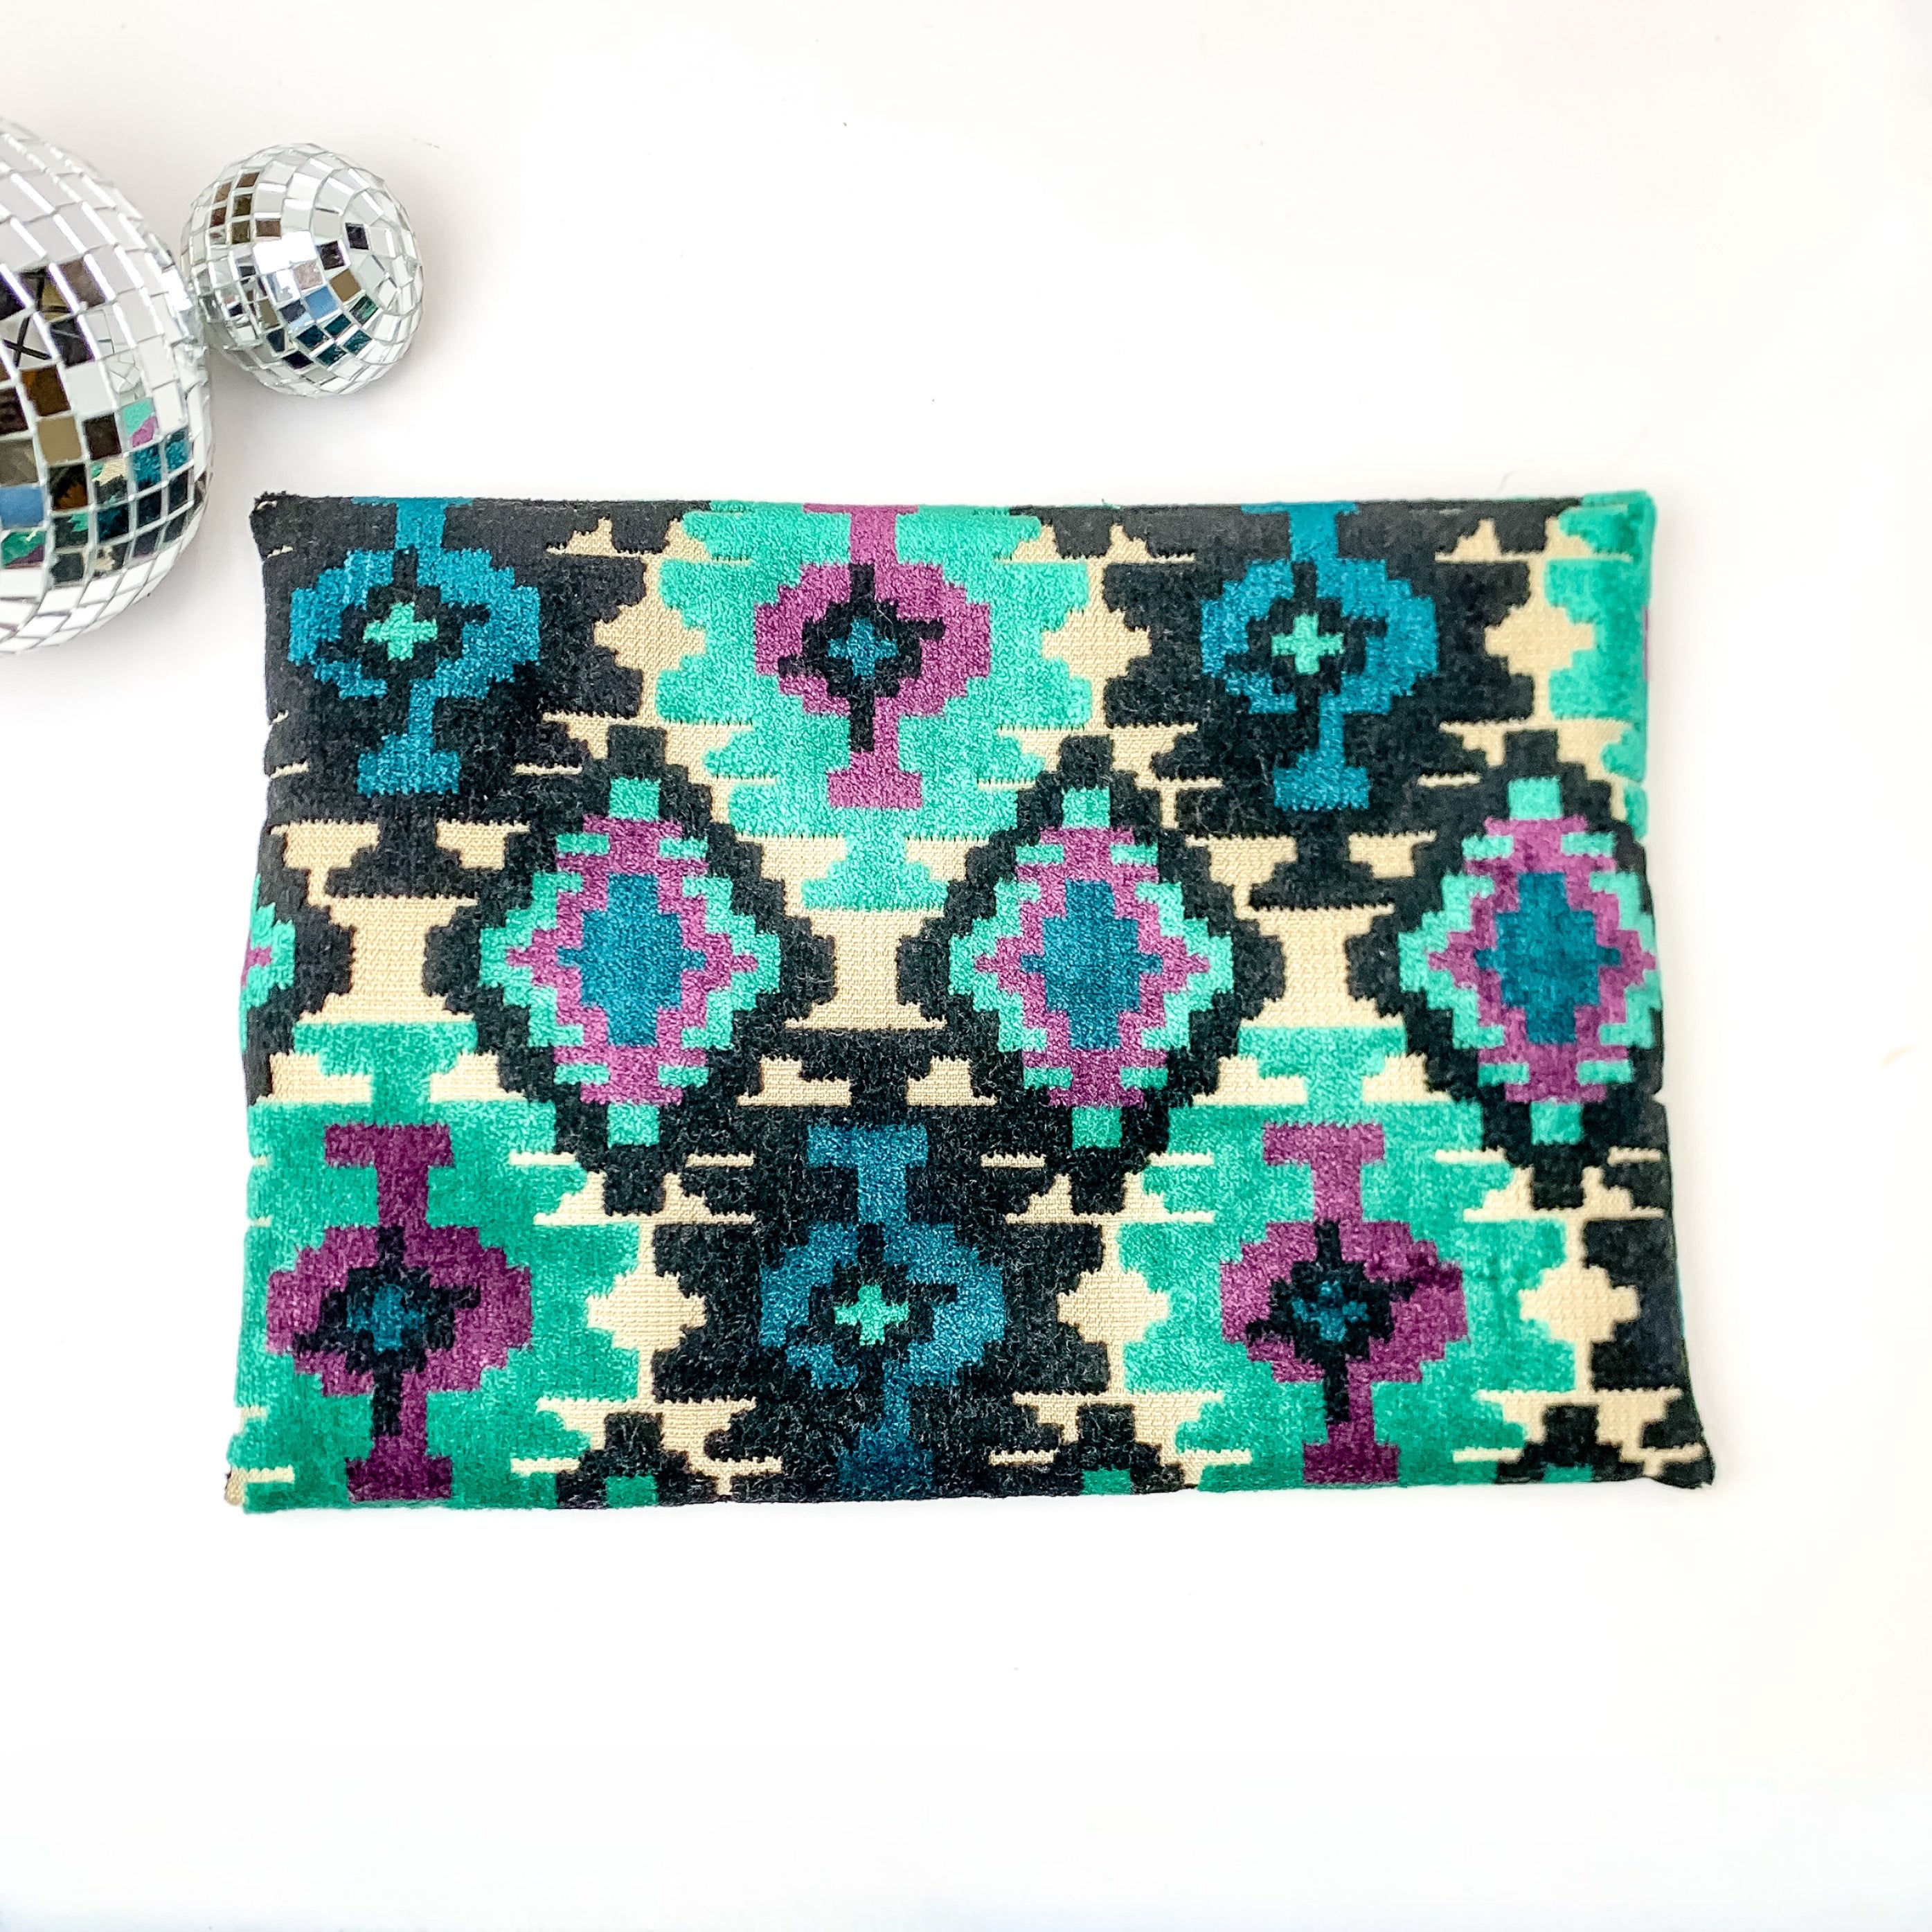 Makeup Junkie | Medium Midnight Aztec Lay Flat Bag in Turquoise Green and Black Mix